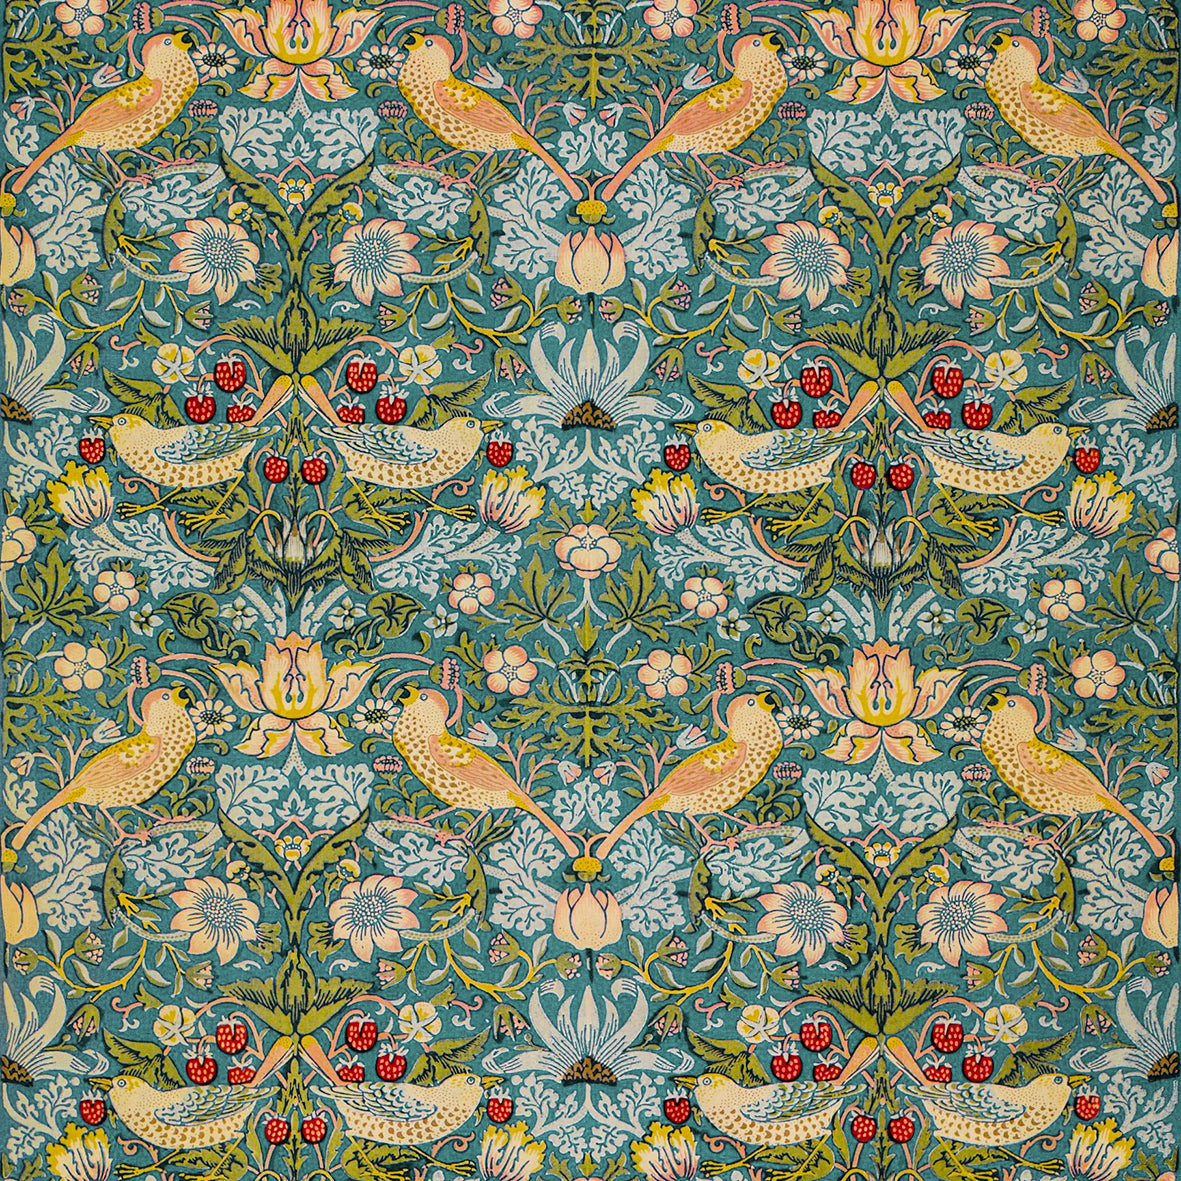 William Morris & Co Luxury Polycotton Towel - Strawberry Thief Collection (Duck Egg Blue)